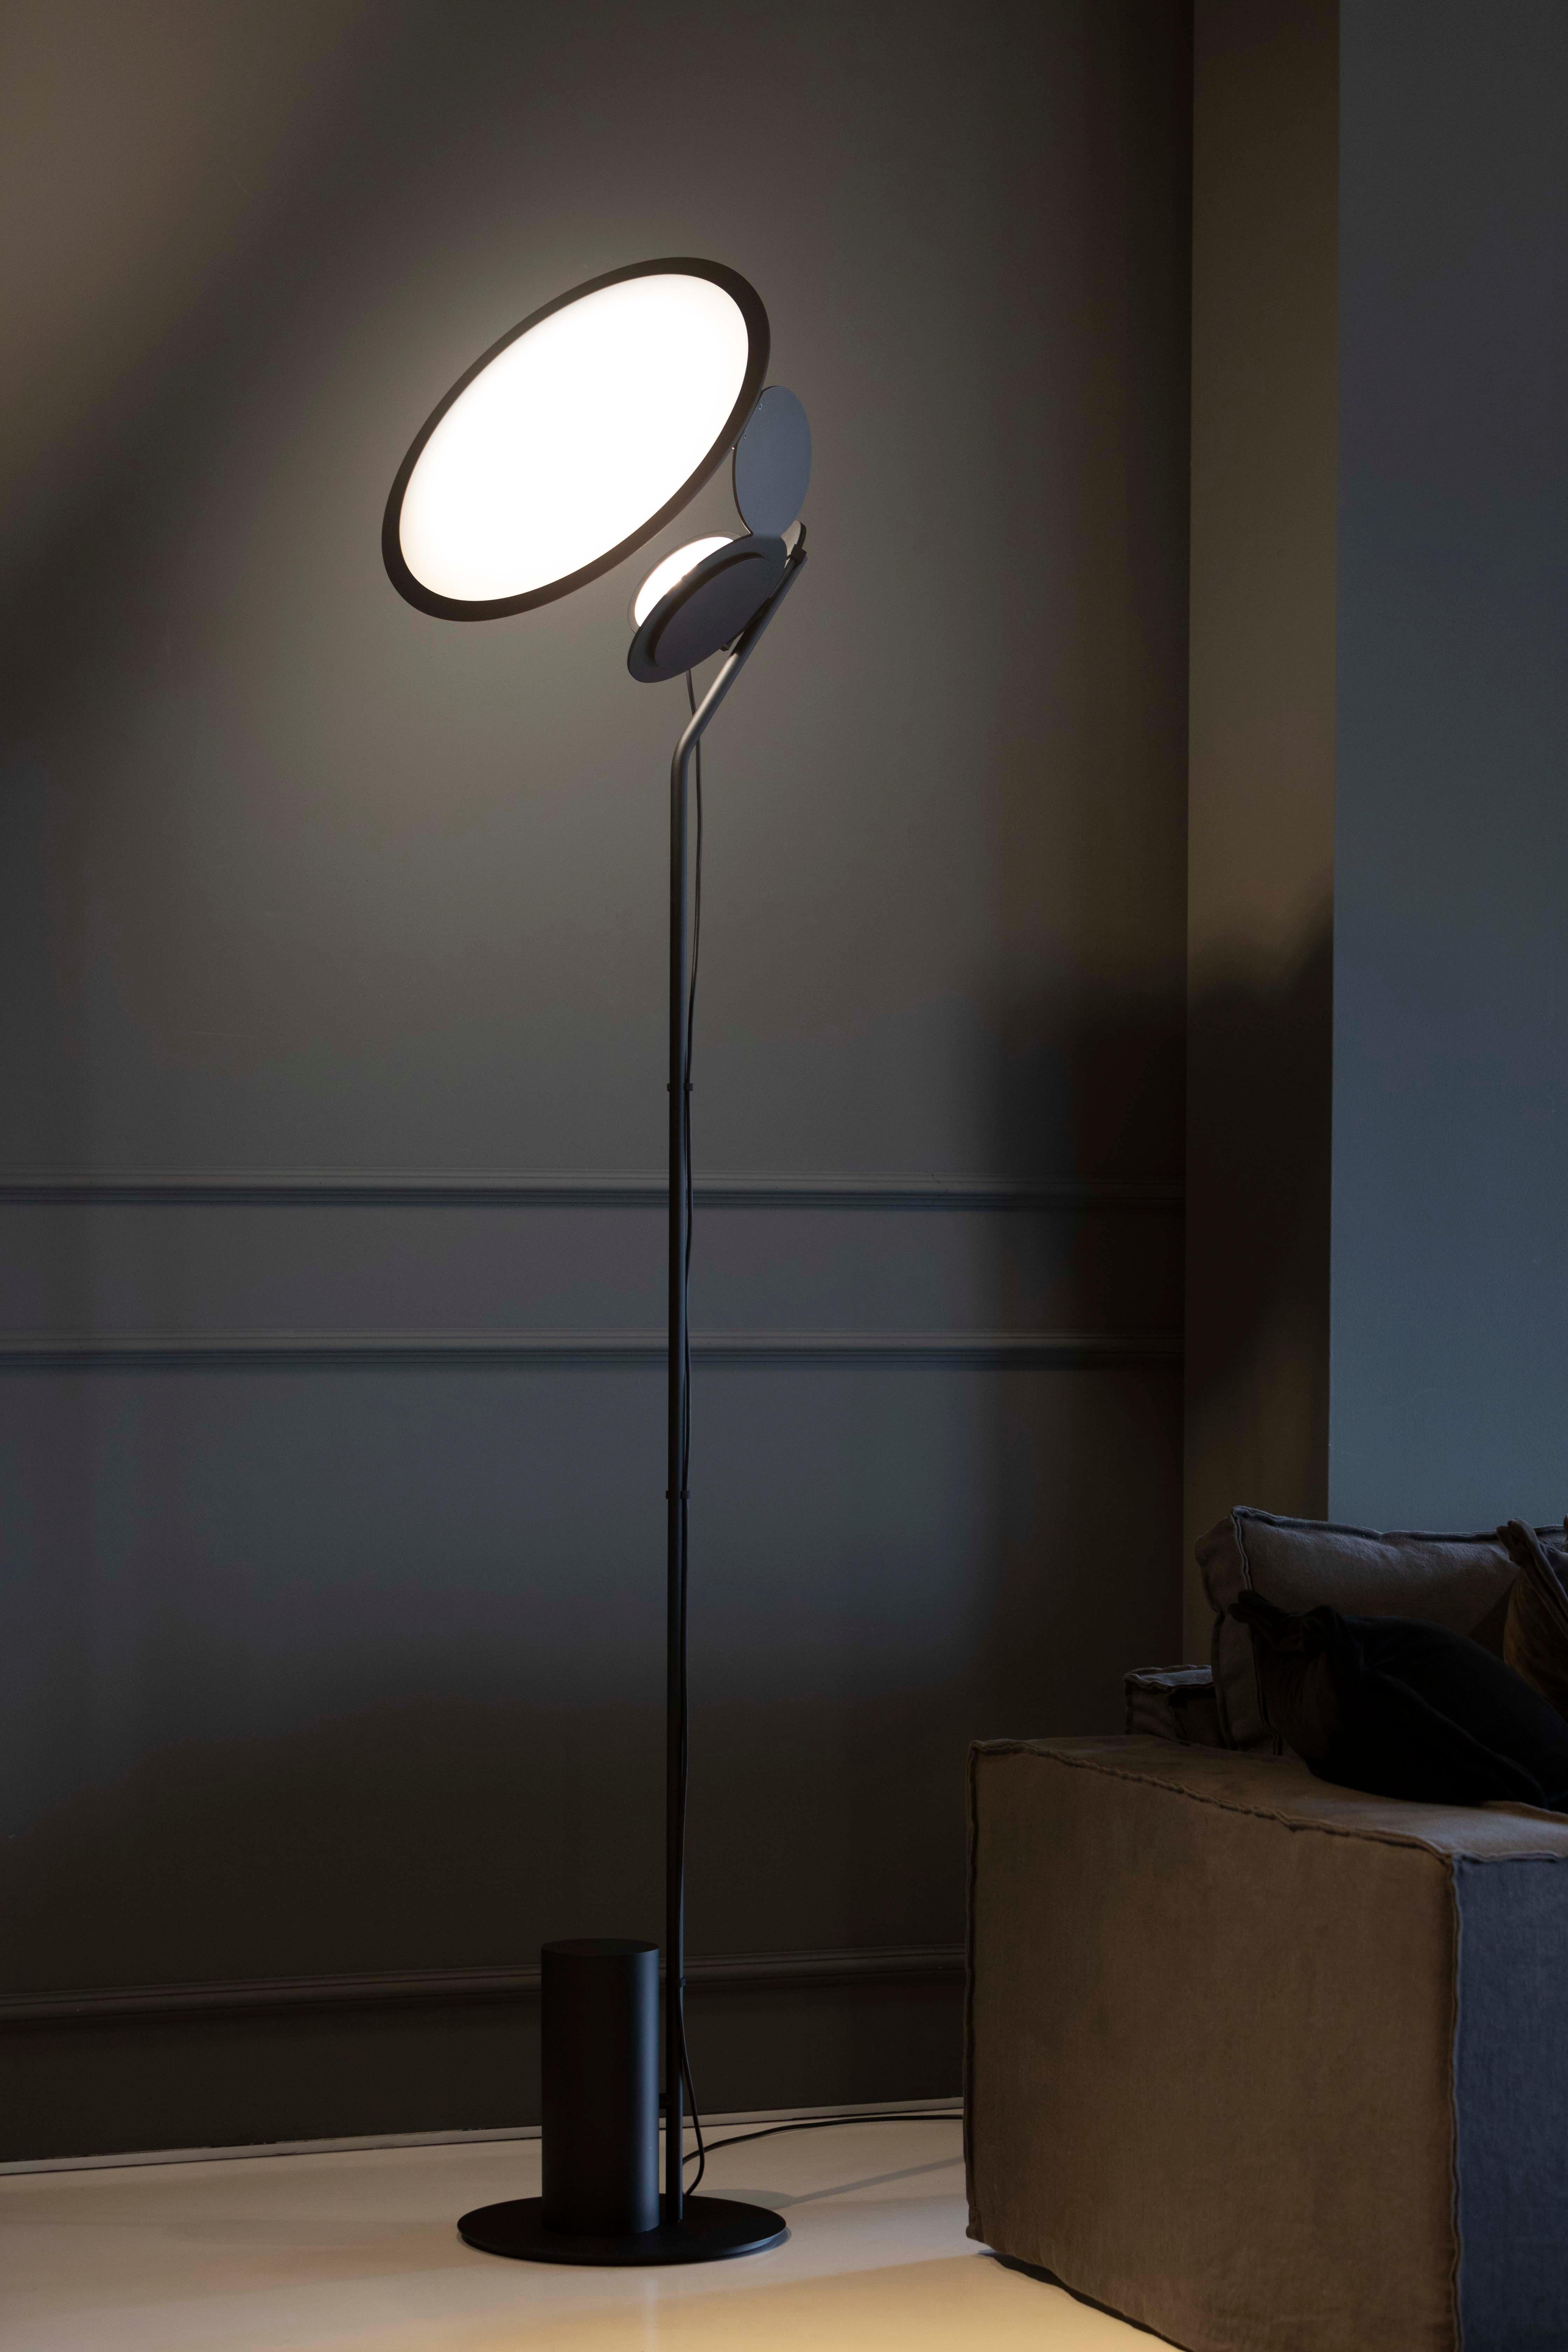 Axolight Cut Medium Floor Lamp in Intense Black by Timo Ripatti In New Condition For Sale In Brooklyn, NY